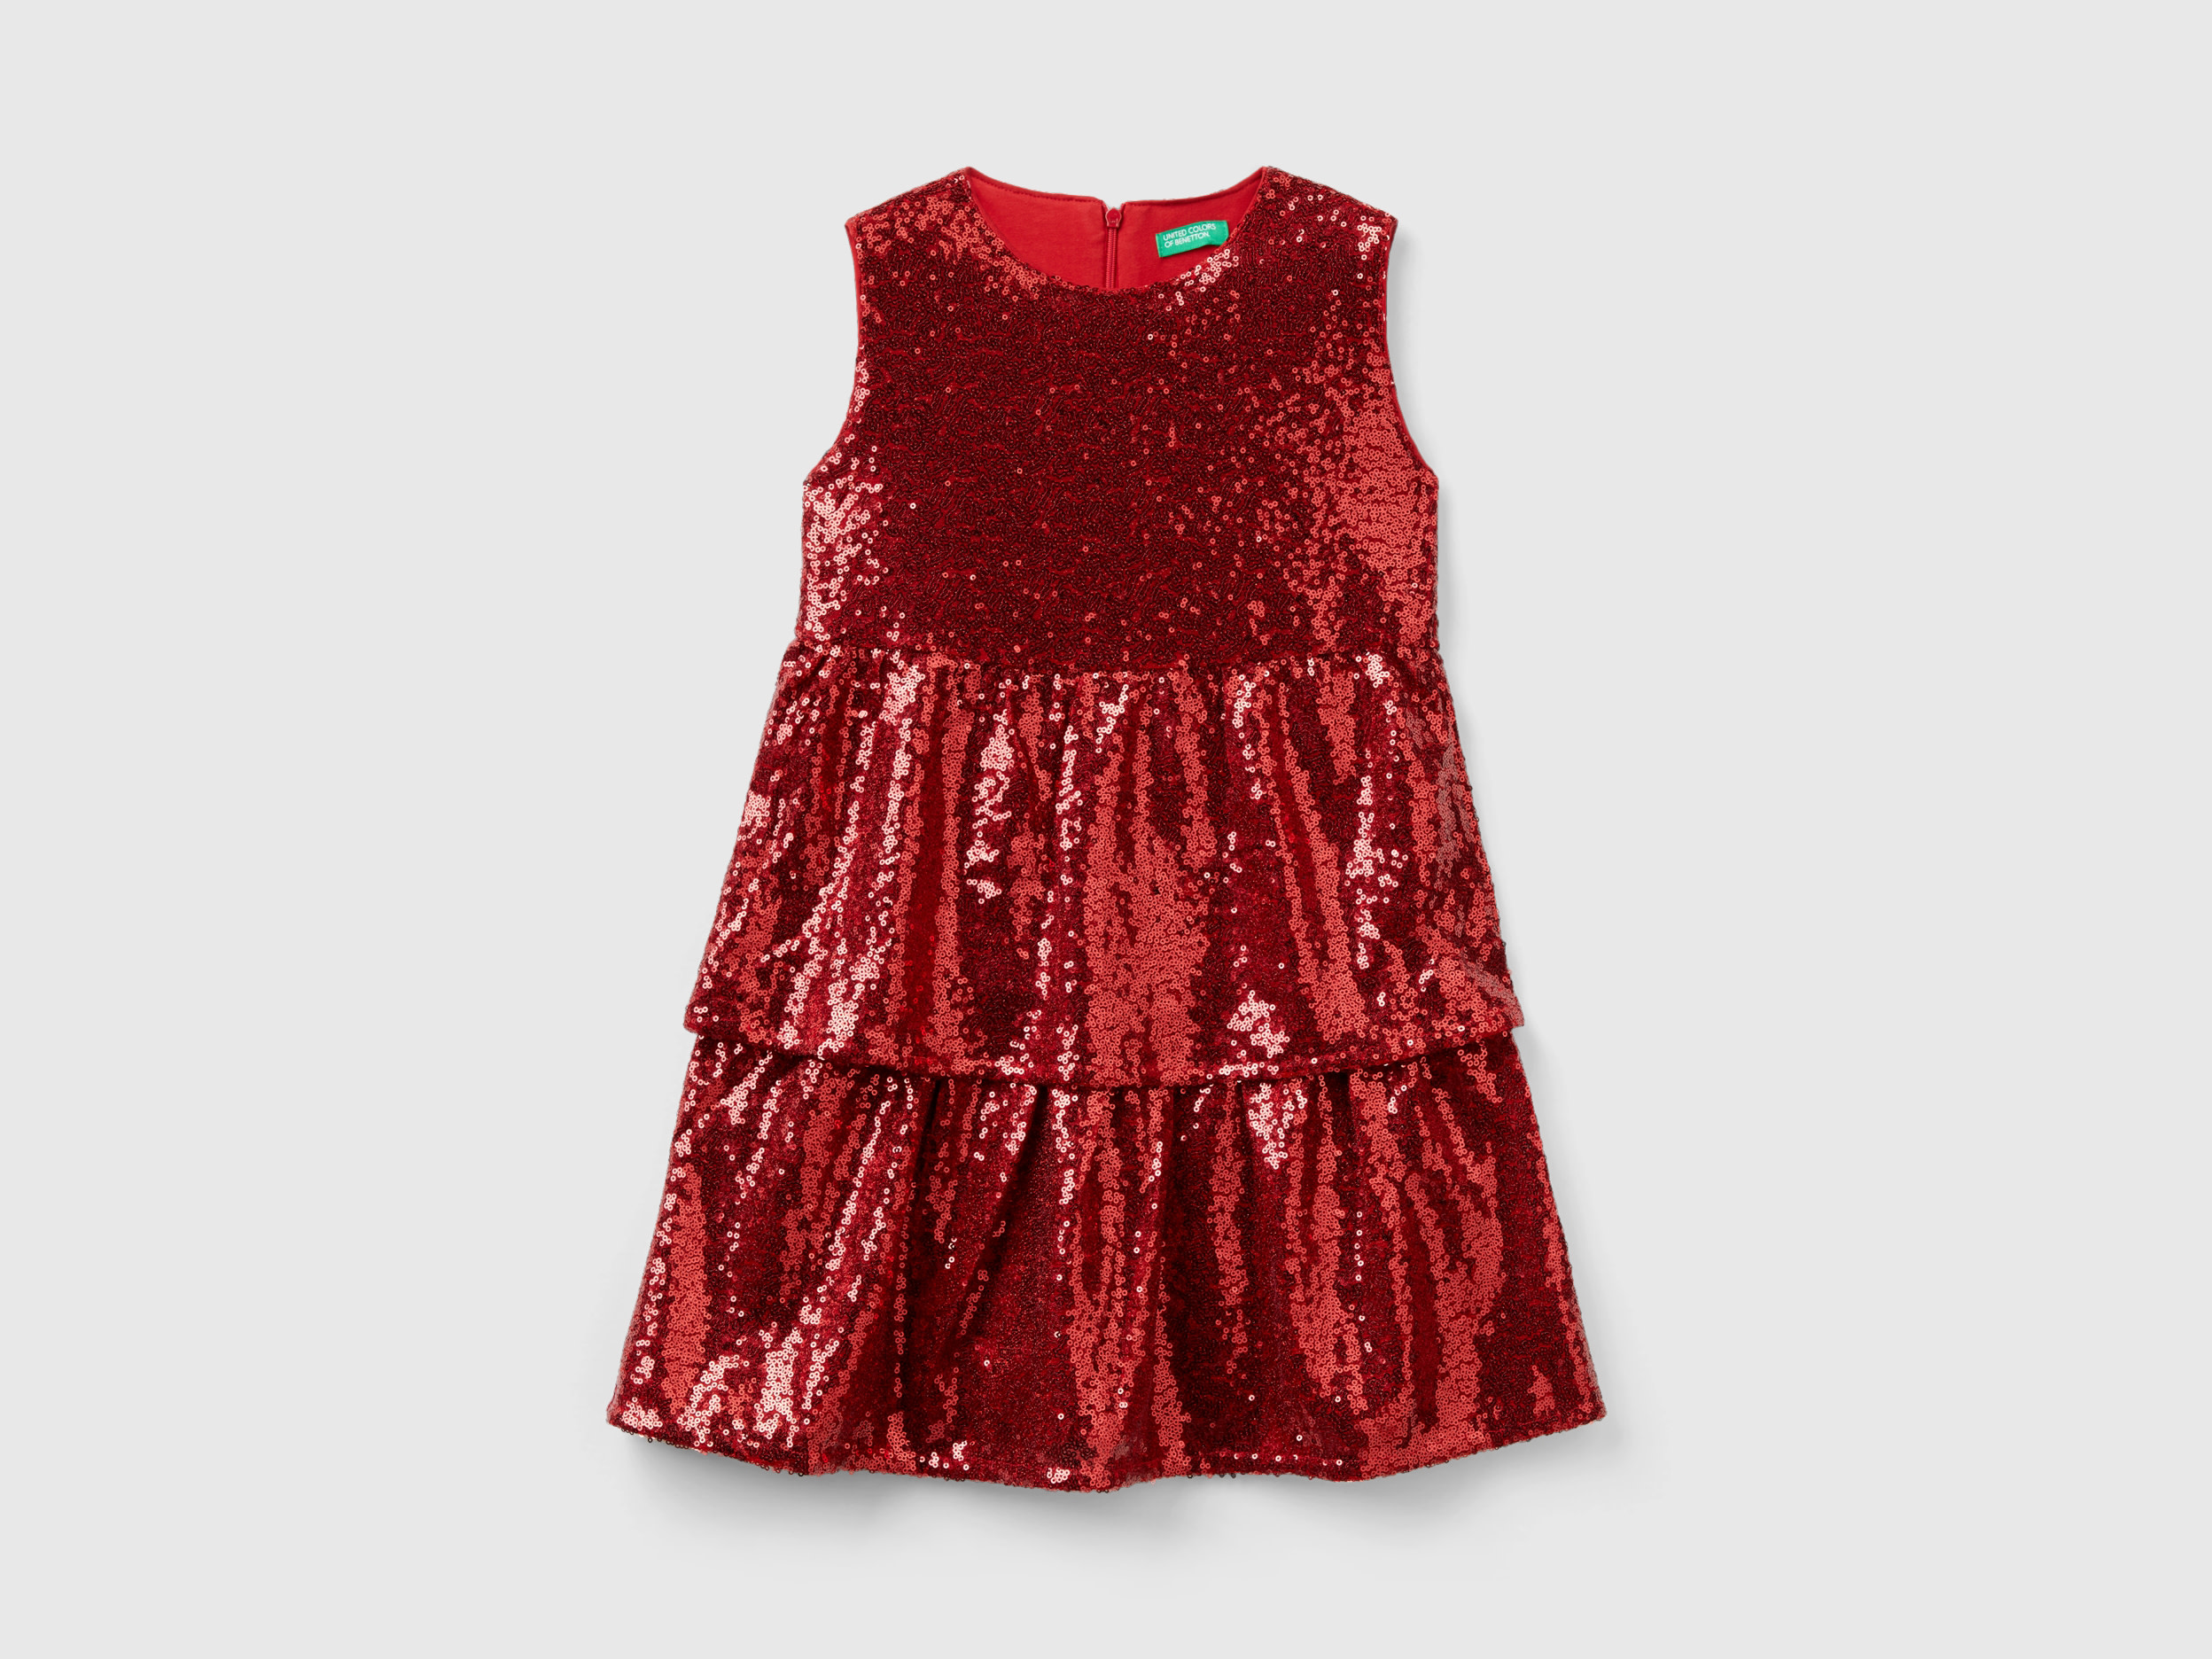 Benetton, Dress With Sequins, size 3XL, Red, Kids